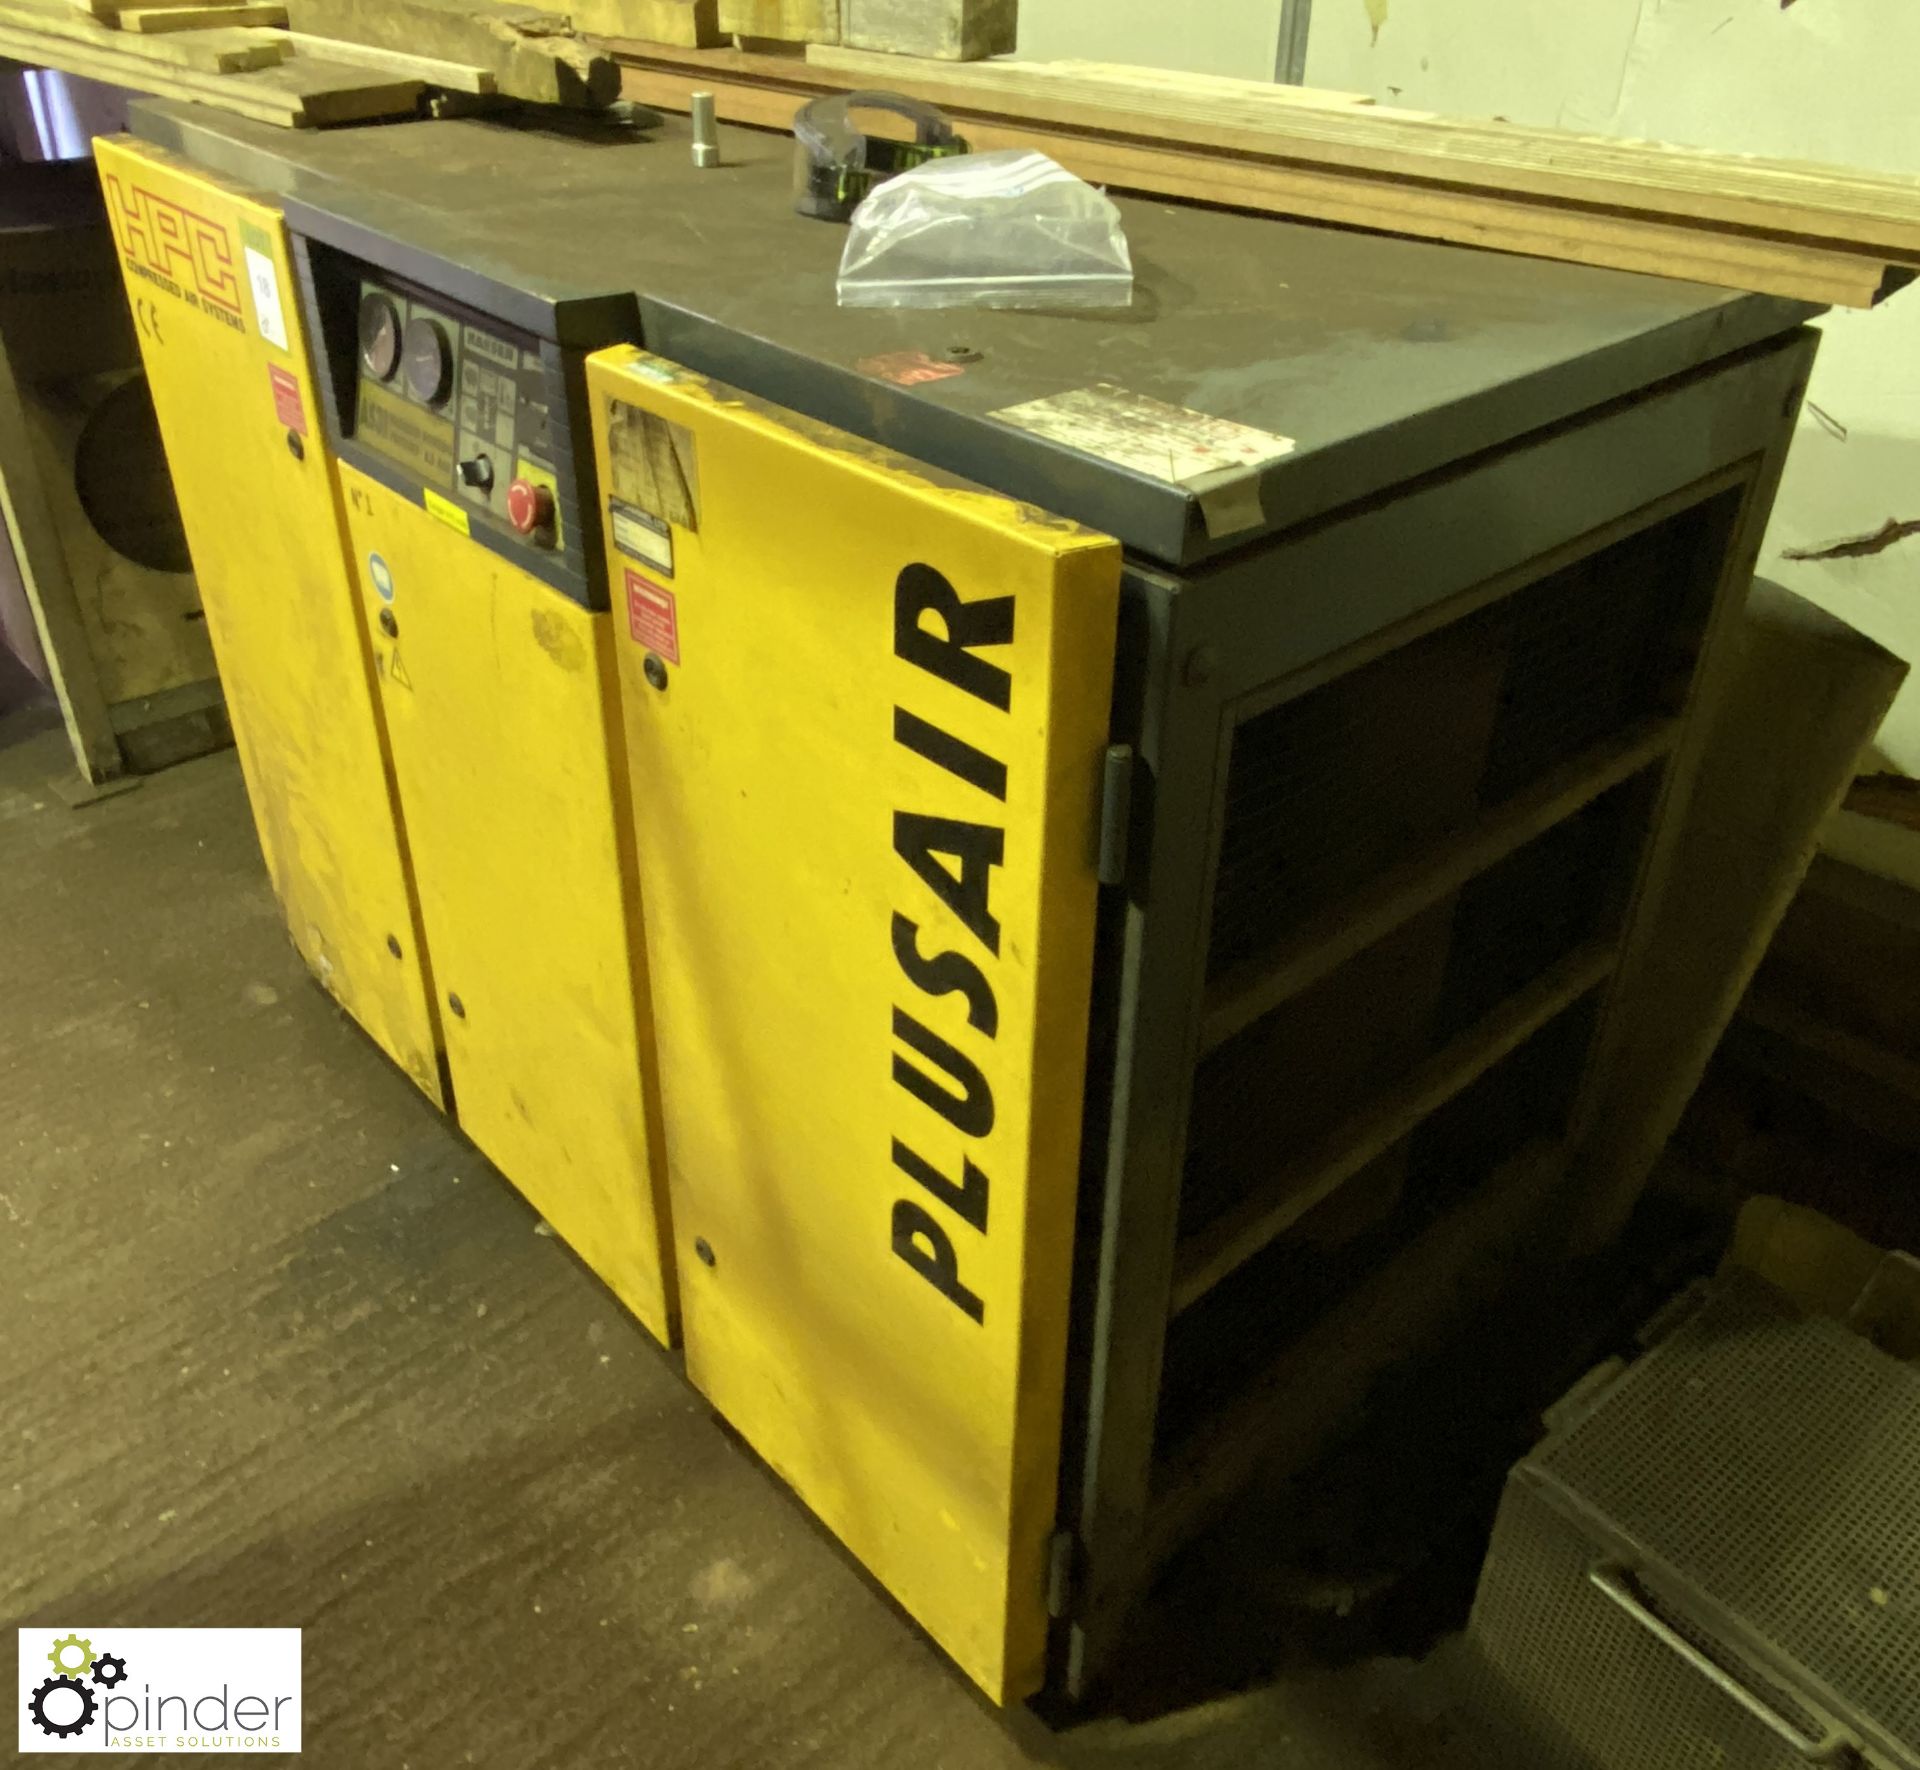 HPC Plusair AS31 Packaged Compressor, SWP 8.5 bar, 24726hours - Image 4 of 5